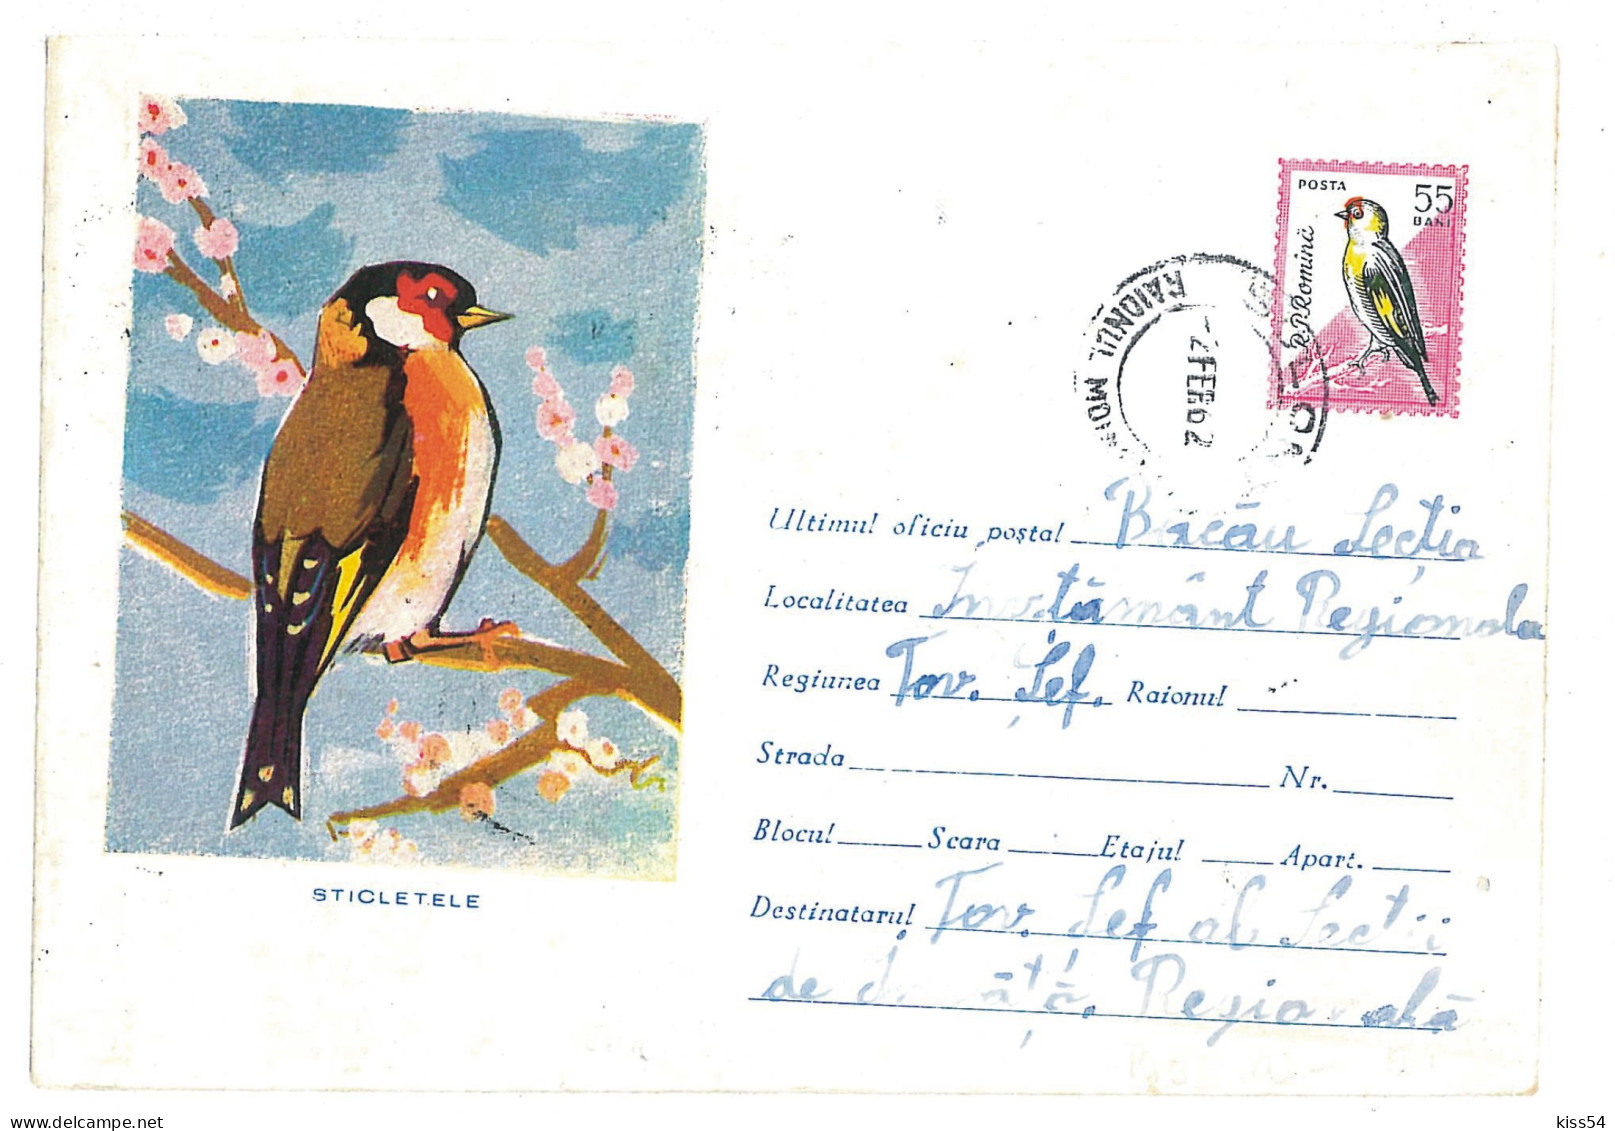 IP 61 - 0411zc Bird, GOLDFINCH, Romania - Stationery ( Little Fixed Stamp ) - Used - 1961 - Entiers Postaux